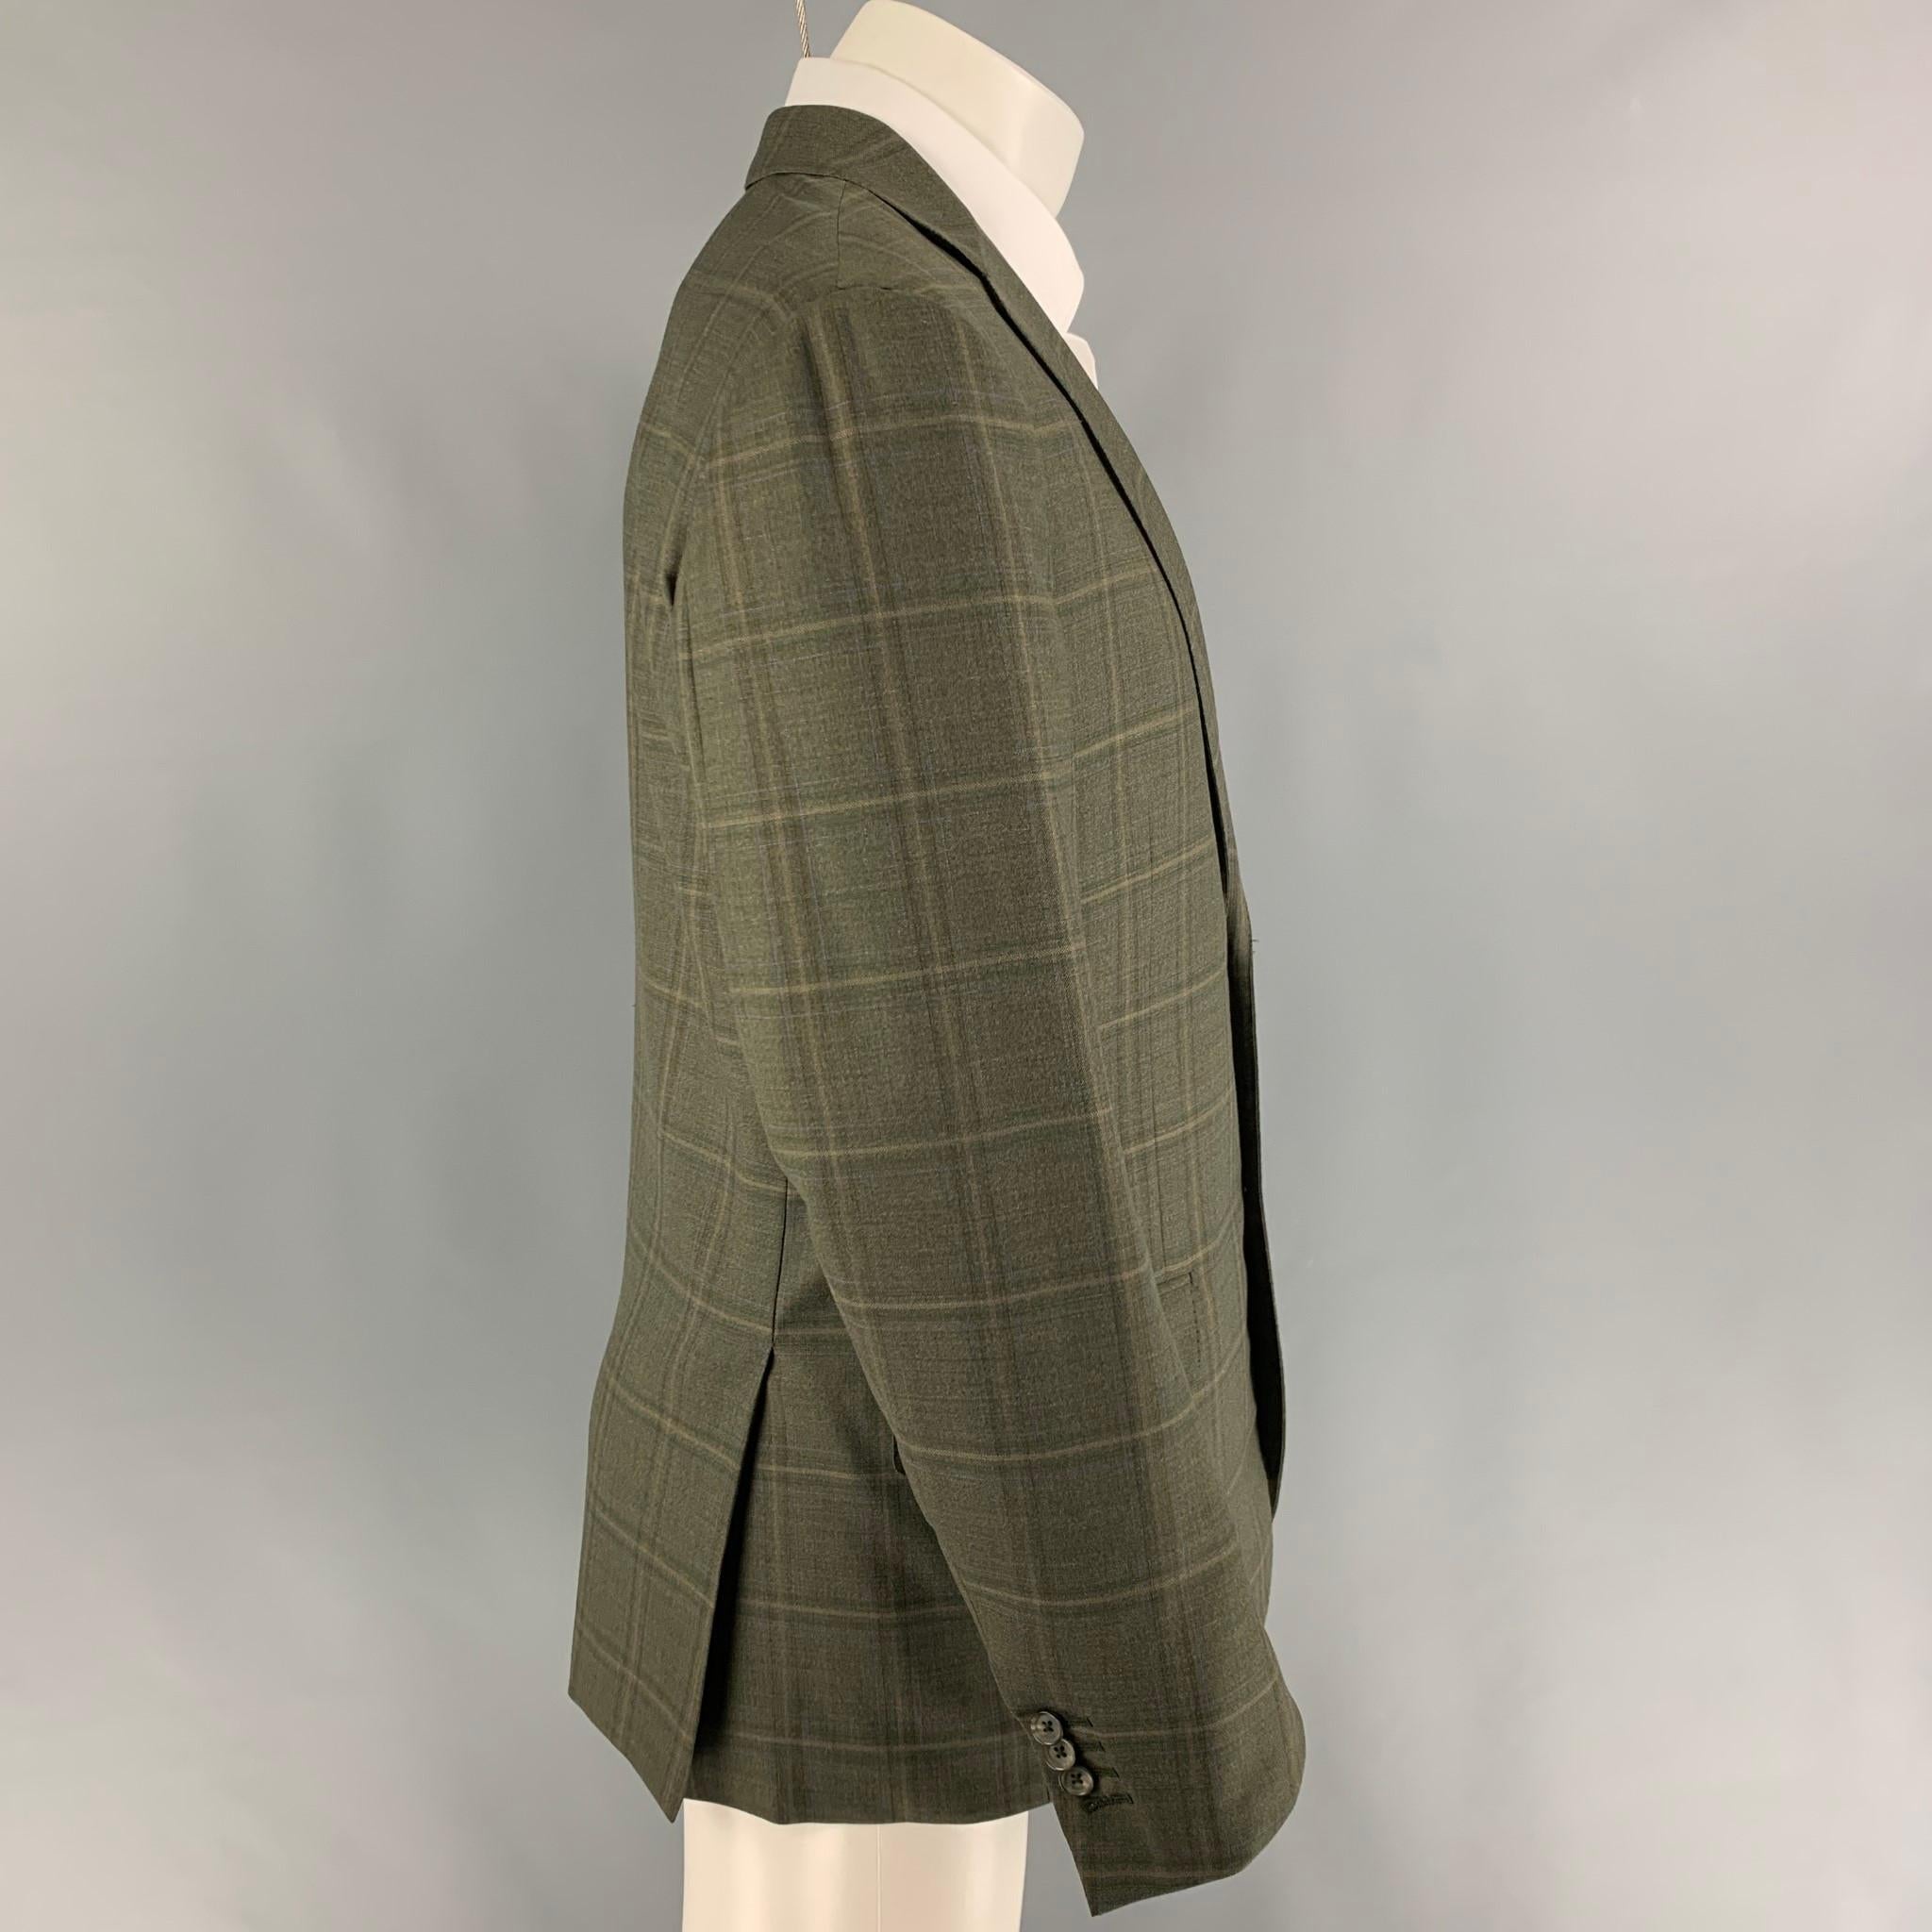 ISAIA sport coat comes in a green & yellow plaid wool with a full liner featuring a notch lapel, flap pockets, double back vent, and a double button closure. Made in Italy.
 
Very Good Pre-Owned Condition.
Marked: 50

Measurements:

Shoulder: 18.5